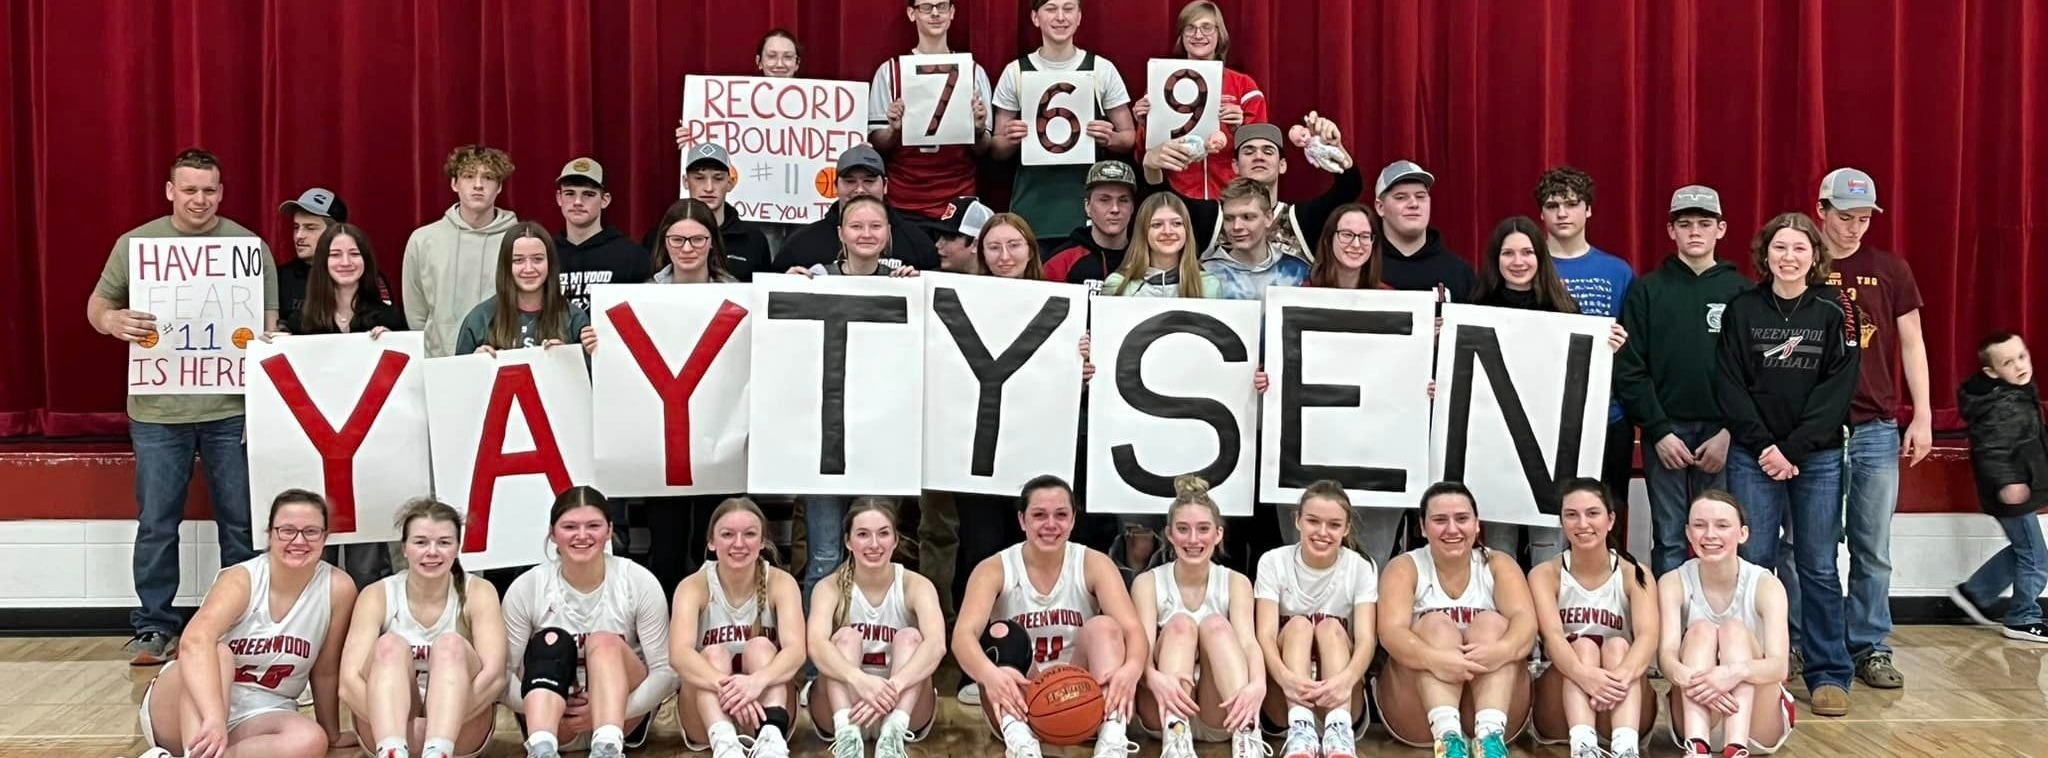 signs say yay tysen, students standing on stage with girls basketball team sitting on floor